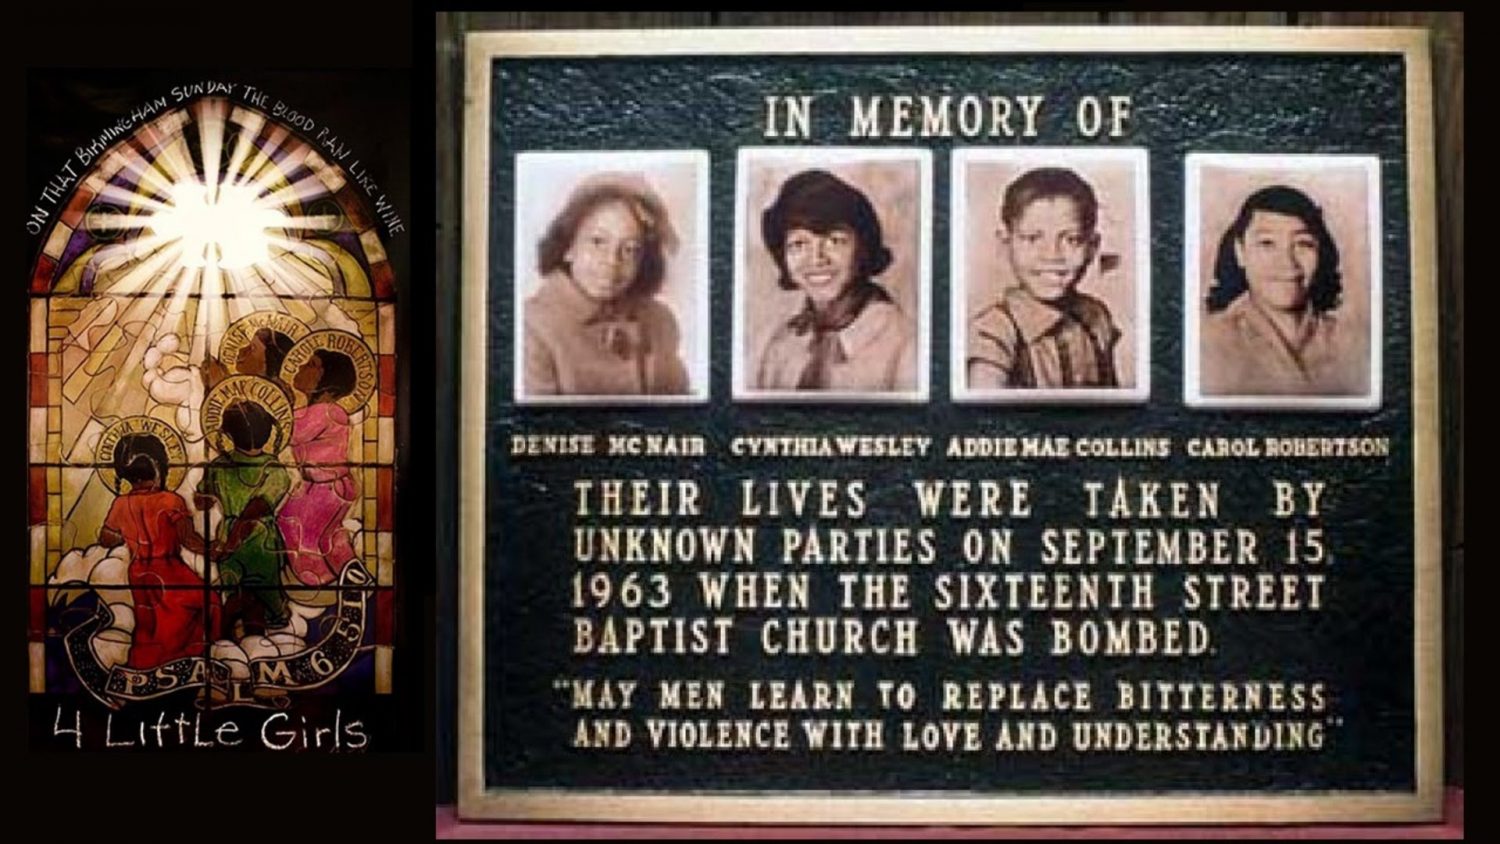 Spike Lee’s 1997 documentary “4 Little Girls” sheds light on the terrorist bombing that occured at 16th Street Baptist Church in Birmingham,  Alabama. Photo taken from YouTube.